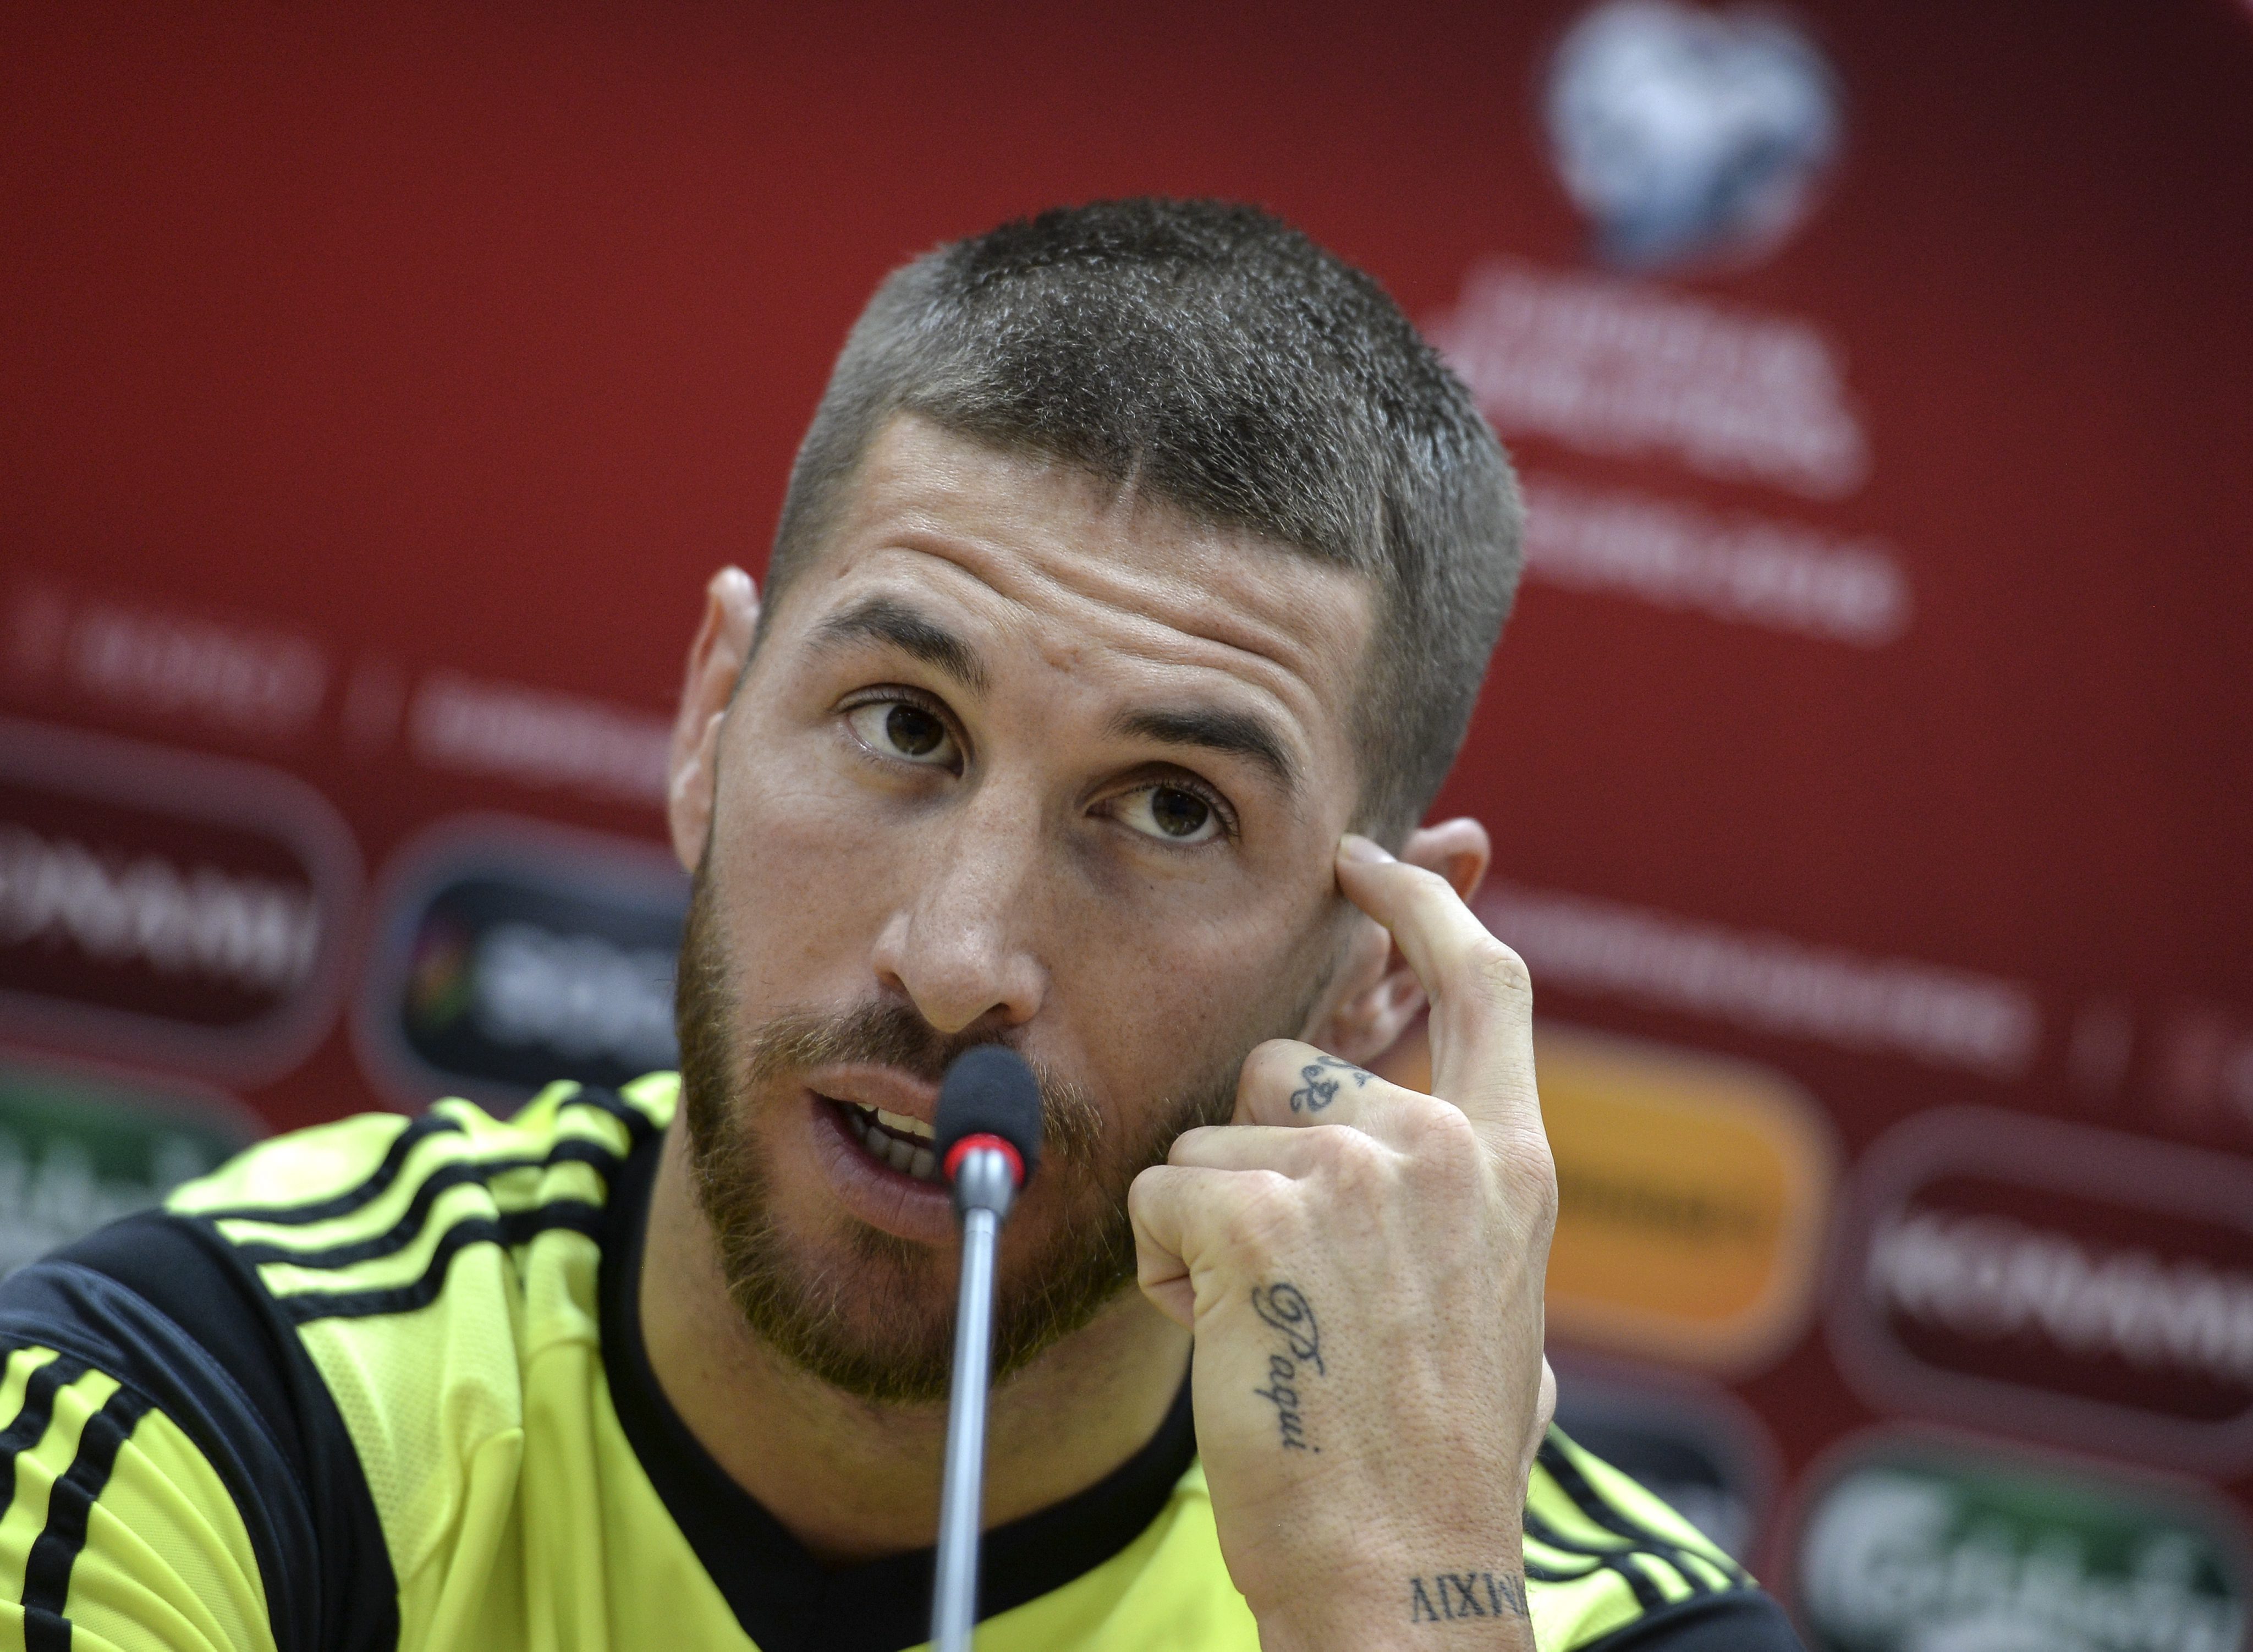 Sergio Ramos is sure to take some time in deciding if he wants to play under Jose Mourinho again after altercations with the Portuguese during his tenure at Real Madrid. (Picture Courtesy - AFP/Getty Images)